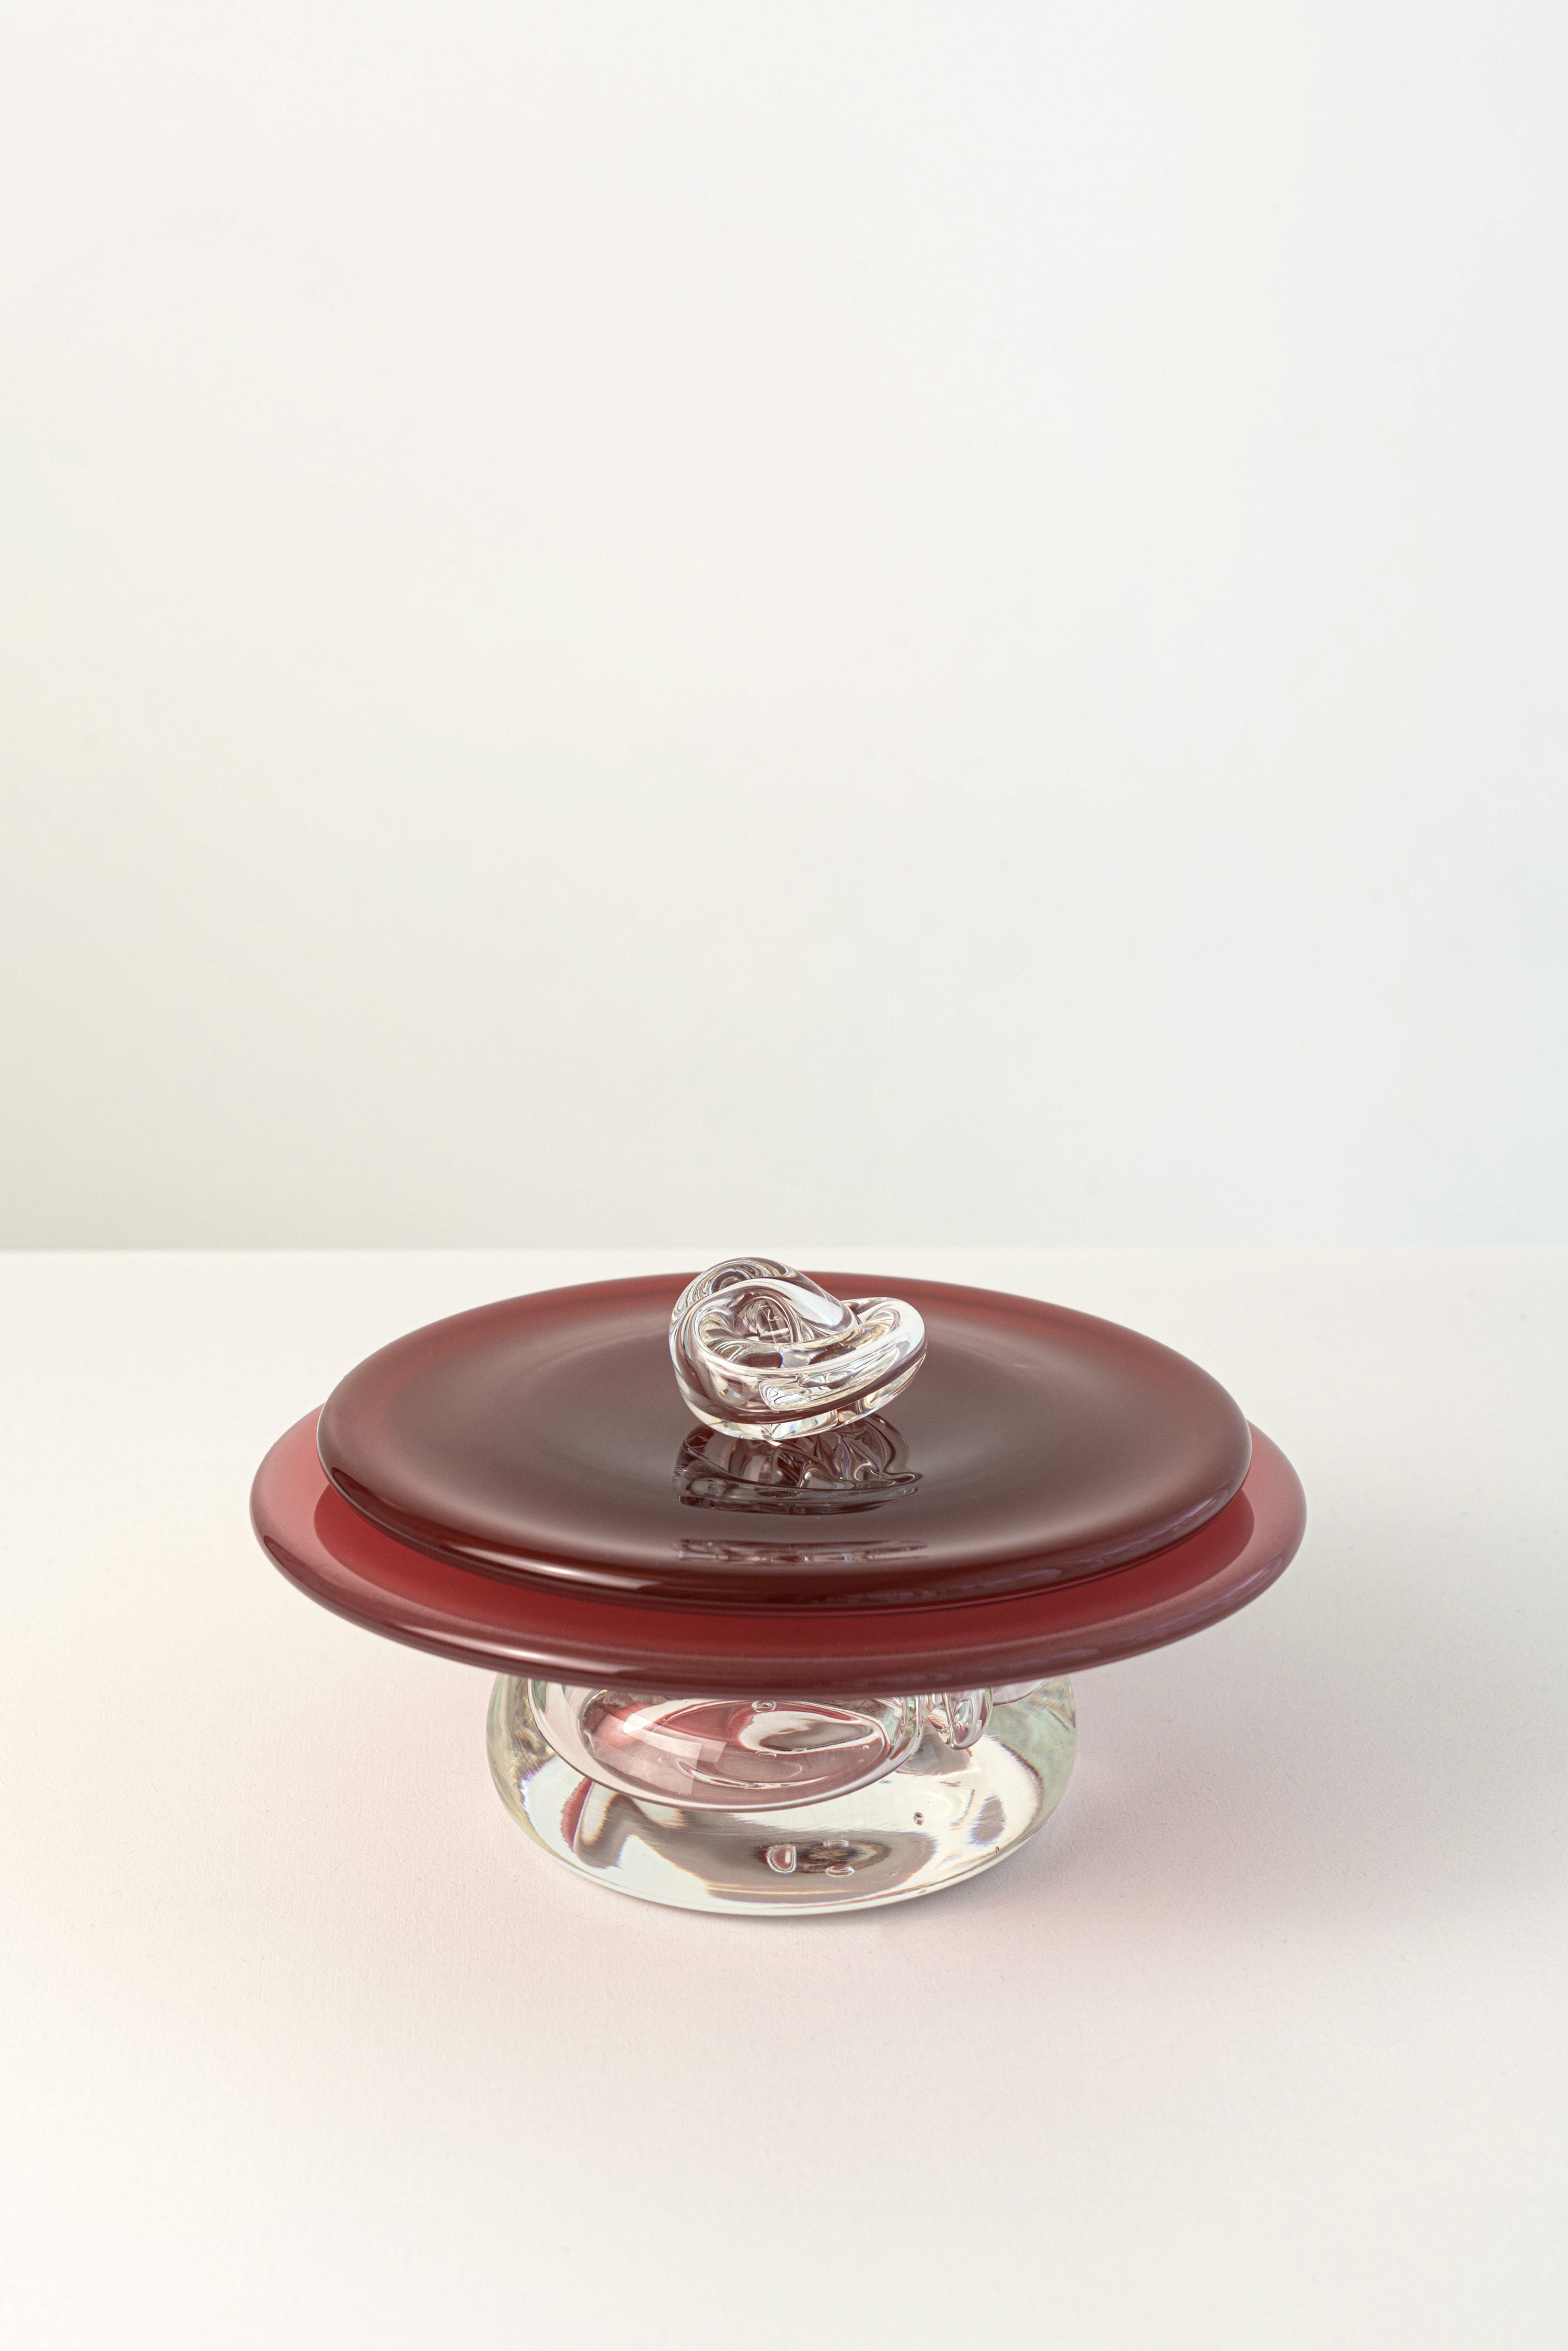 Her Masters Voice Platter by Selma Hamstra